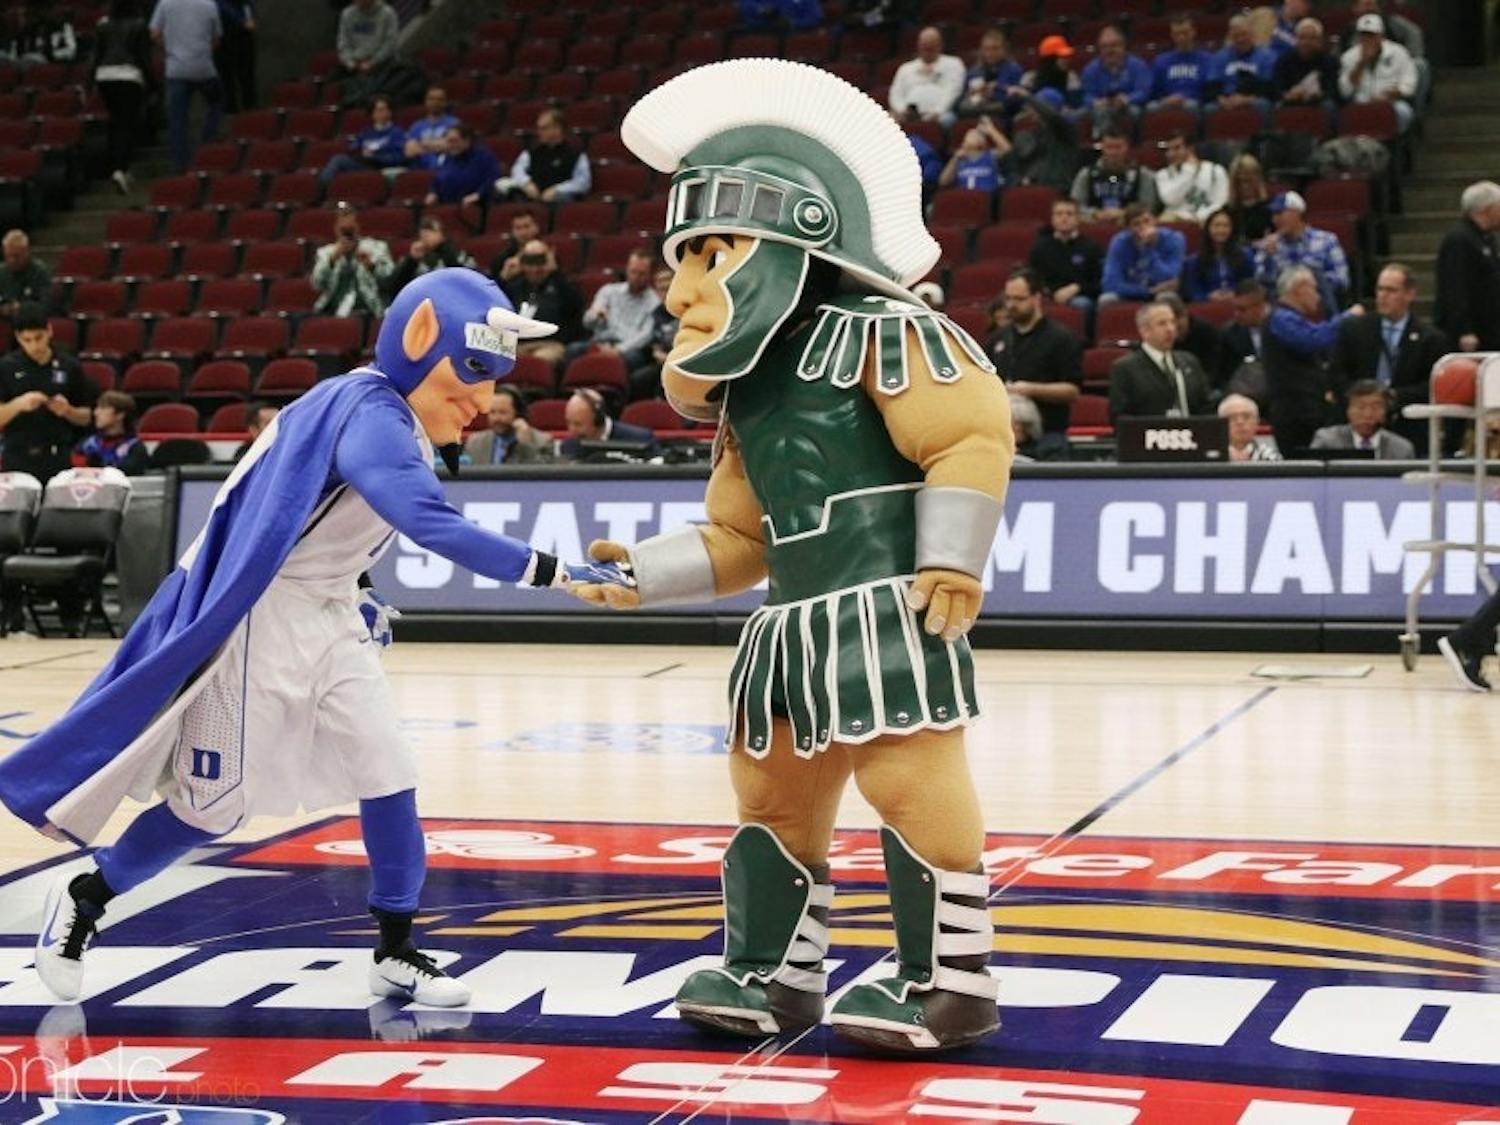 Duke has gotten the better of the Spartans in all but one of their matchups in the last 20 years.